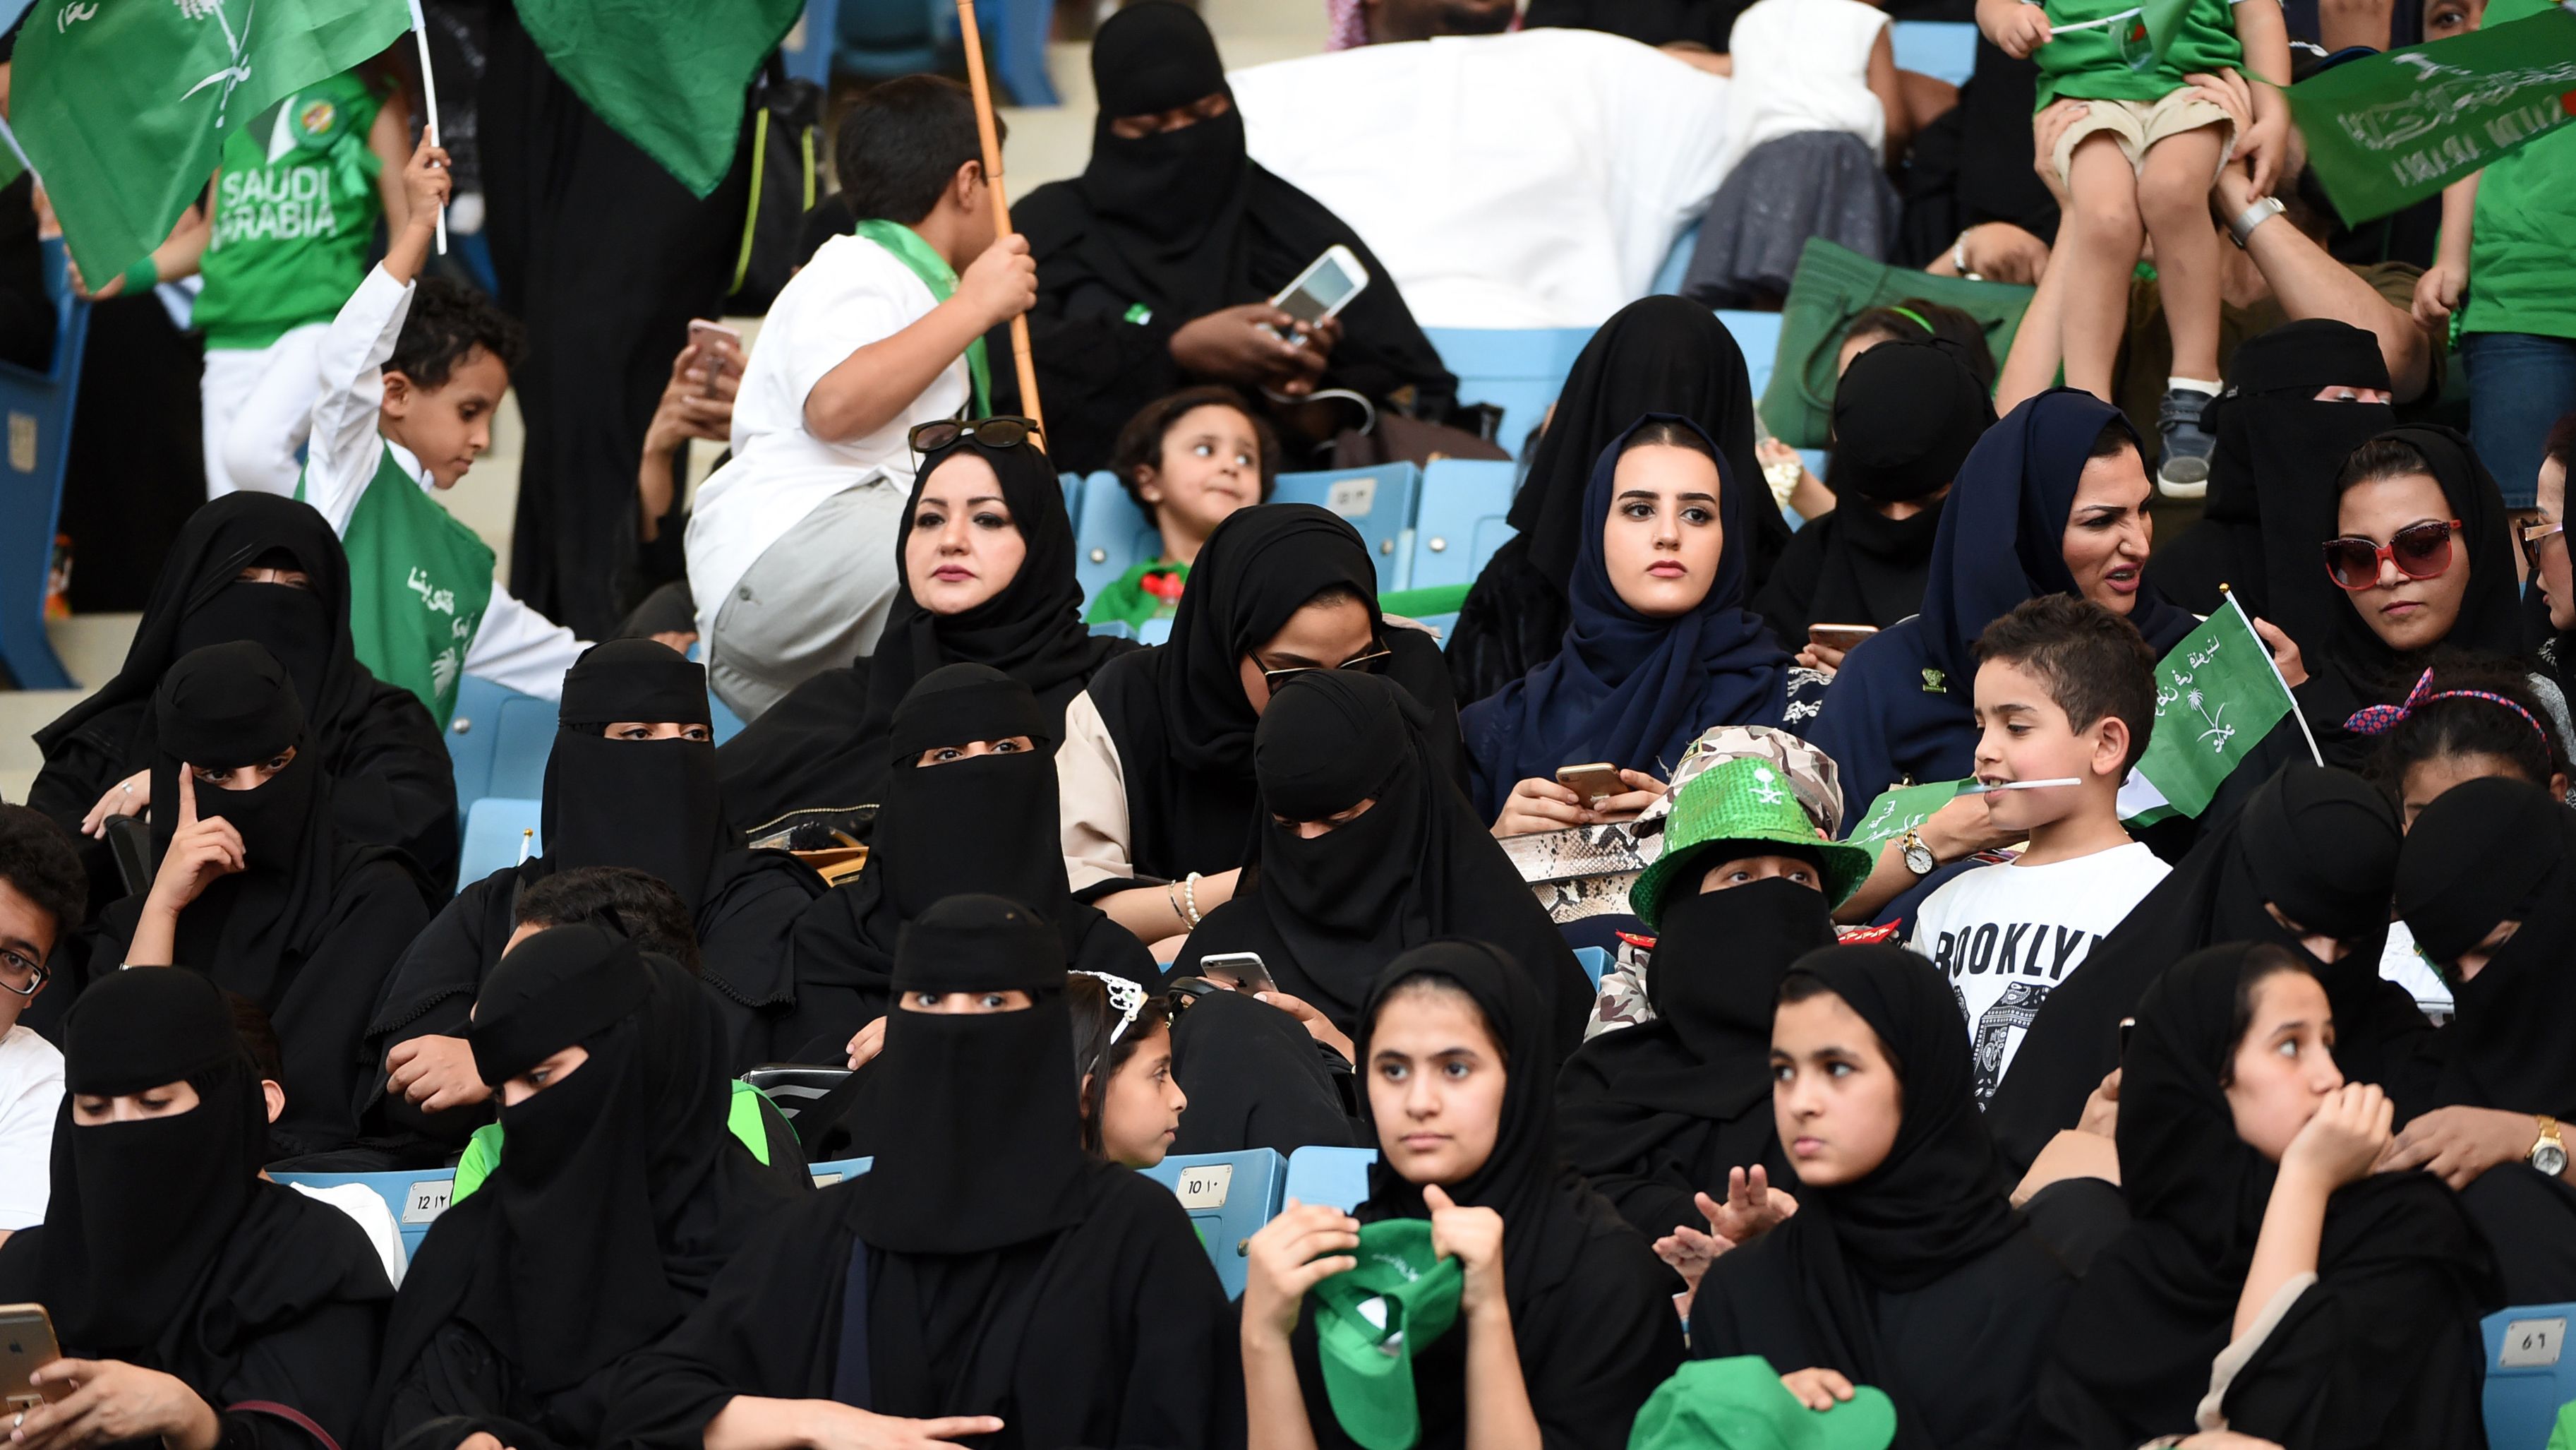 Gender mixing is becoming more common. Some Saudi stadiums have recently opened their doors  to women.